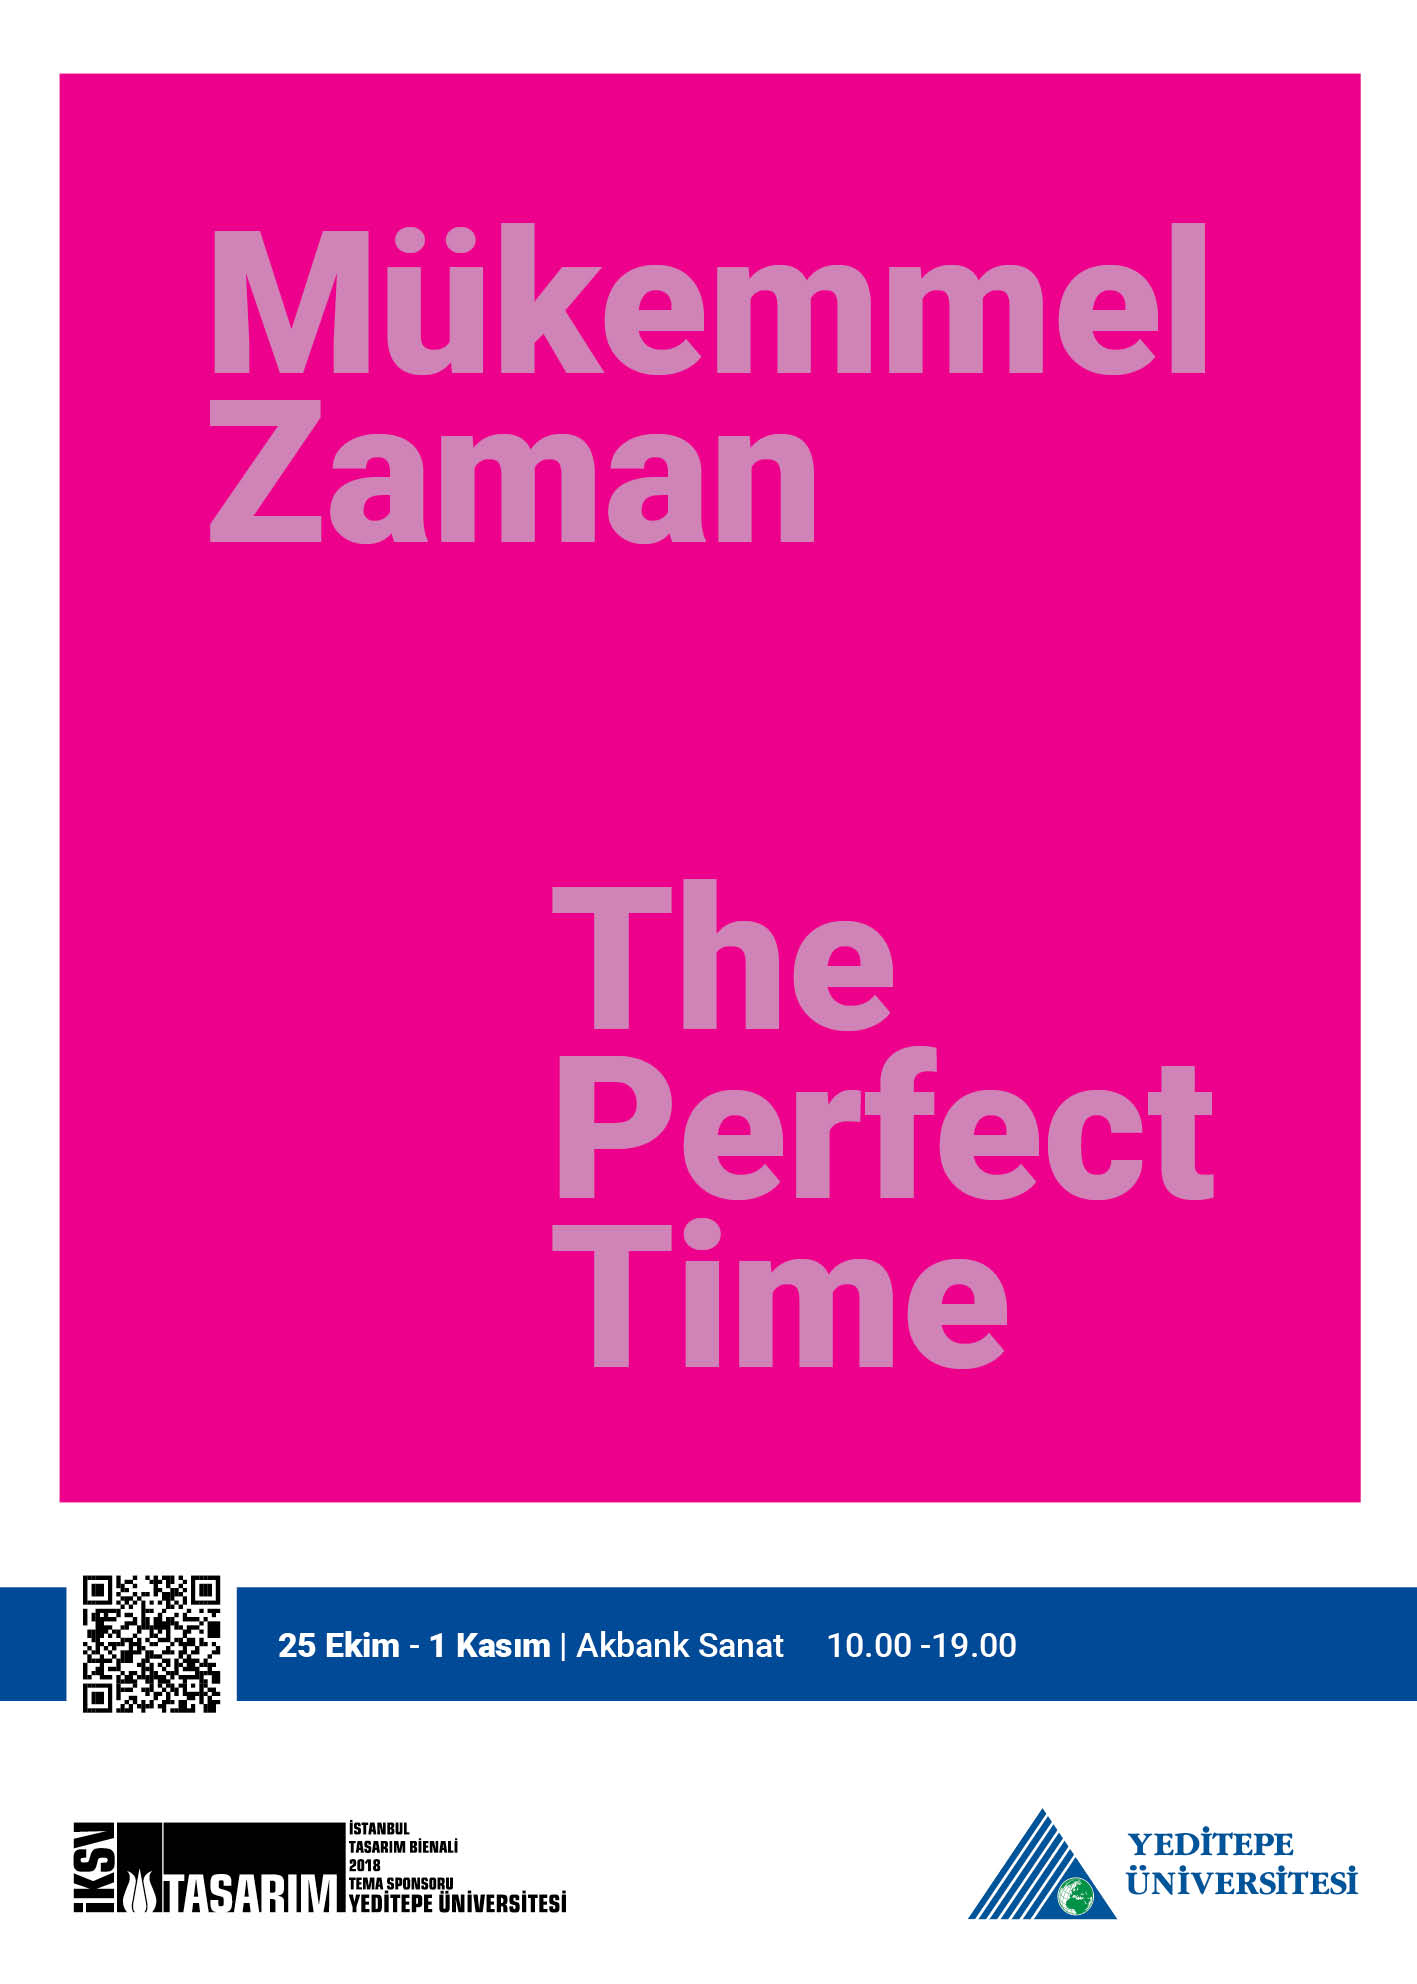 The Perfect Time / 4th Istanbul Design Biennial